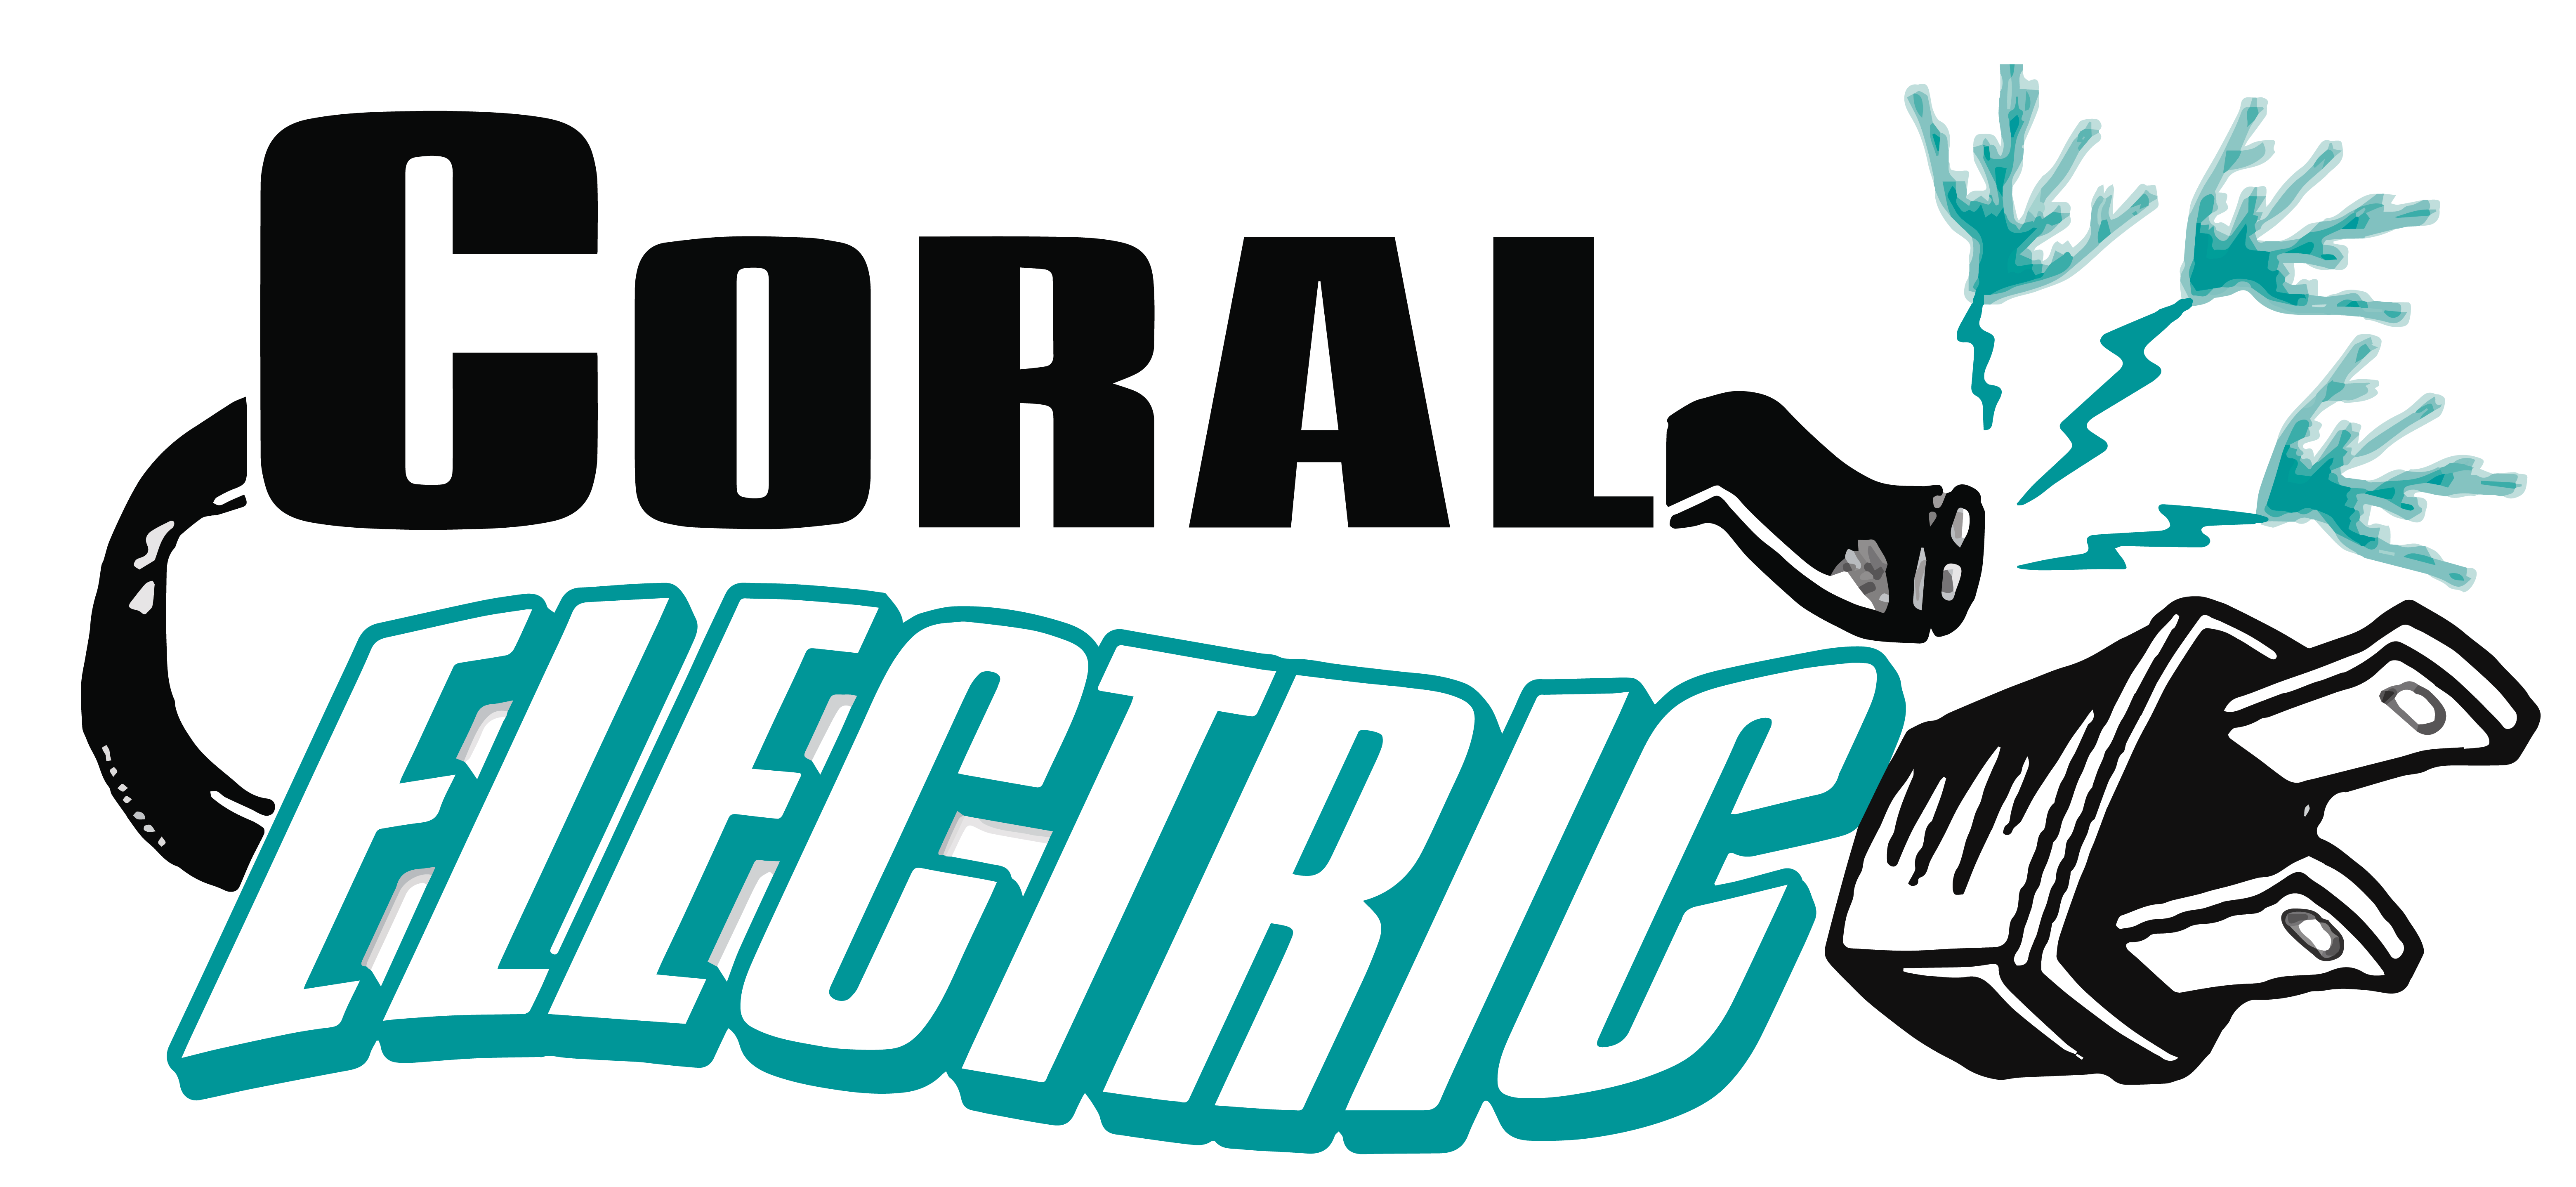 Coral Electric Offers Electrical Contracting Services for the State of Florida